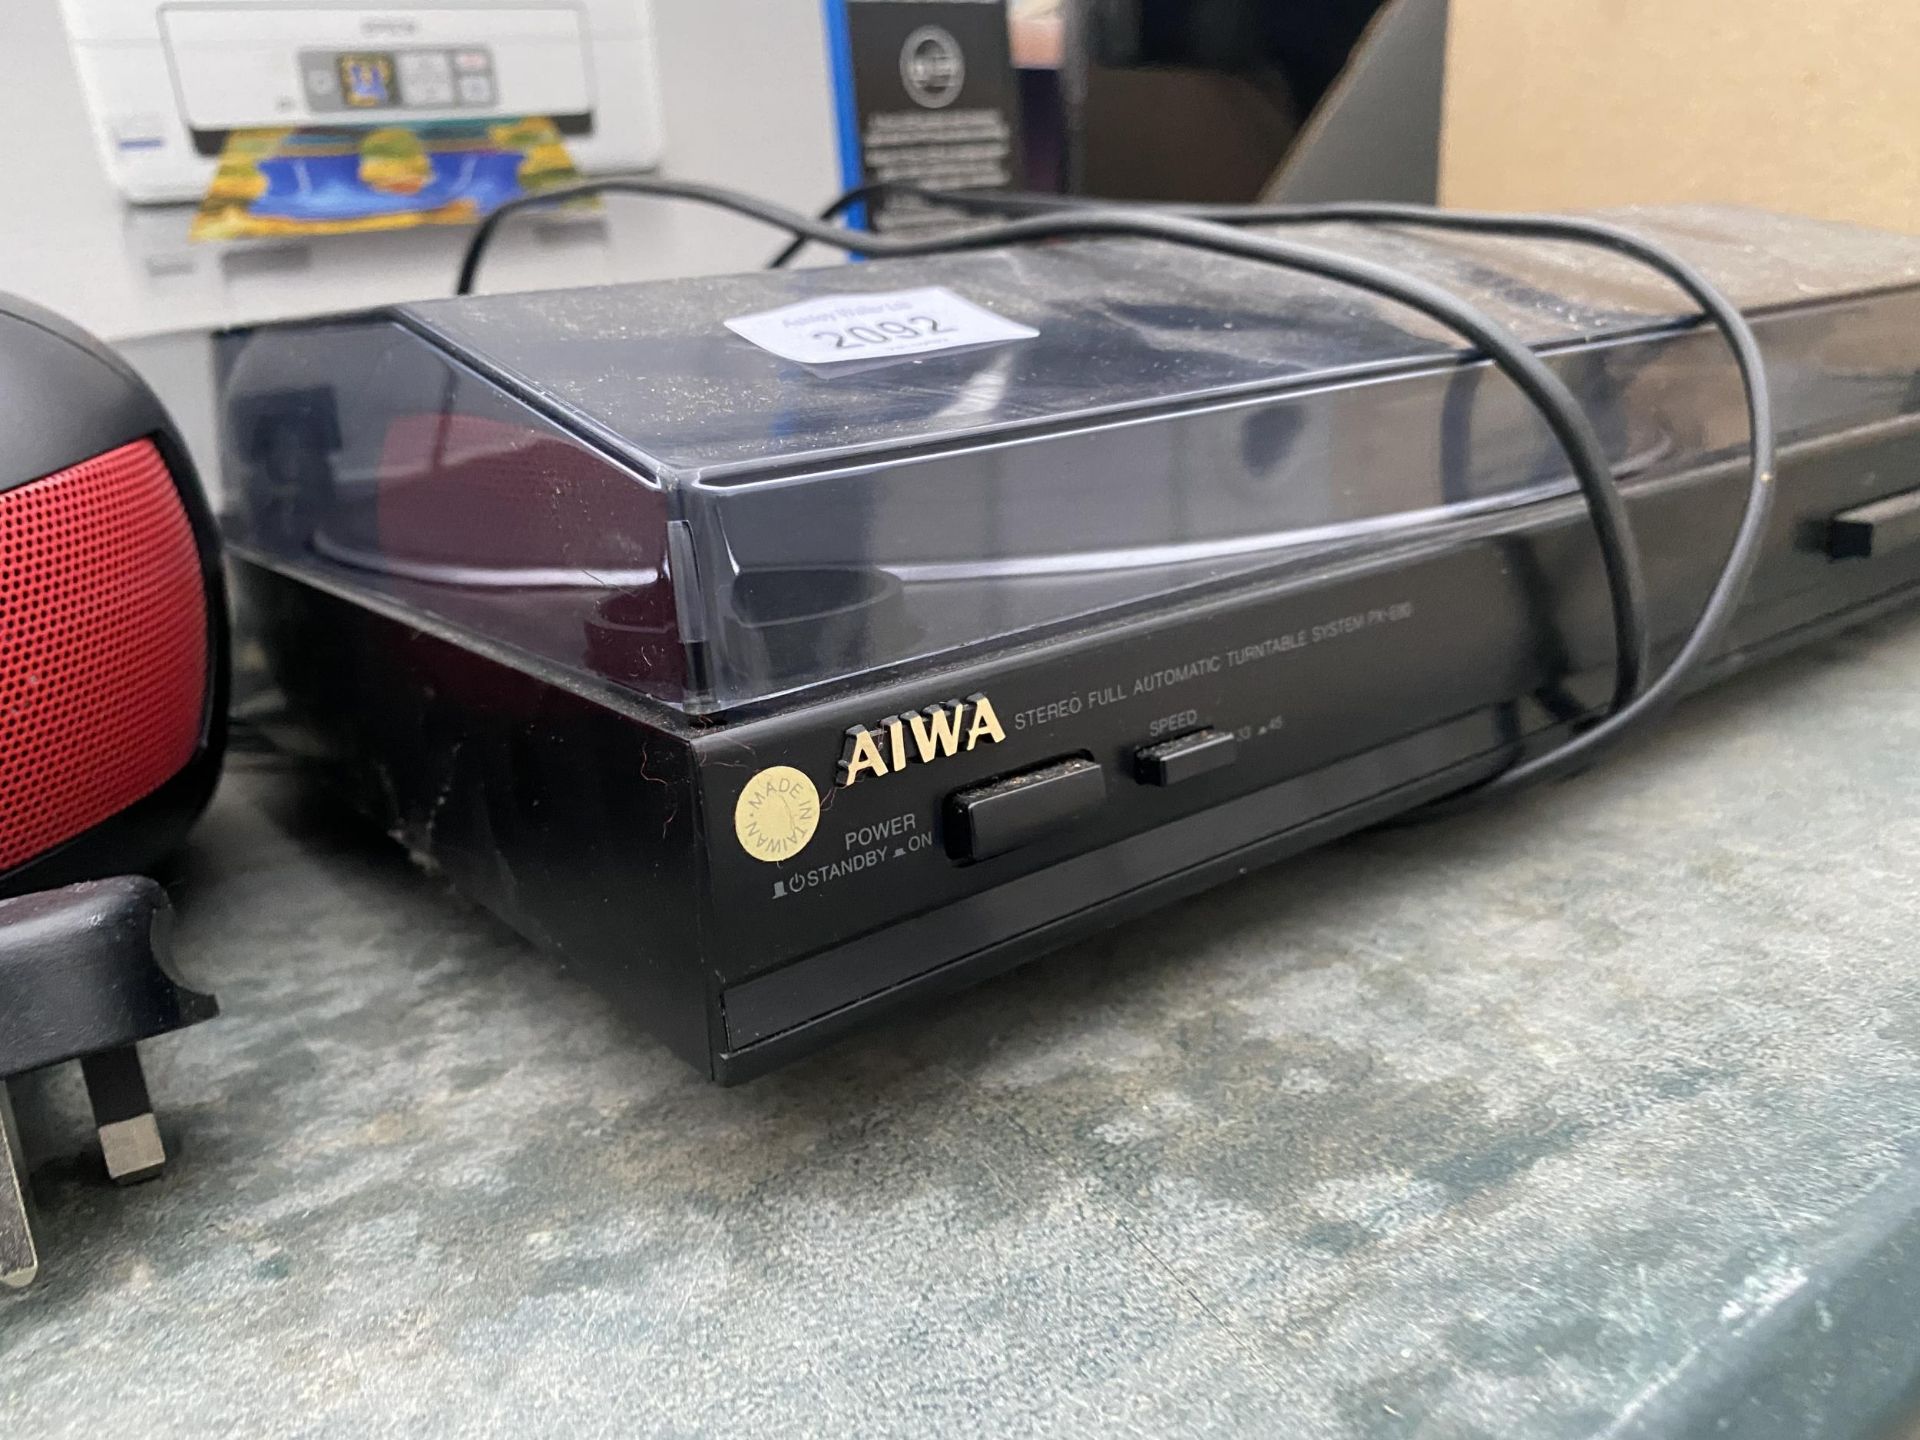 AN AIWA TURNTABLE AND A DURONIC CD PLAYER - Image 3 of 4